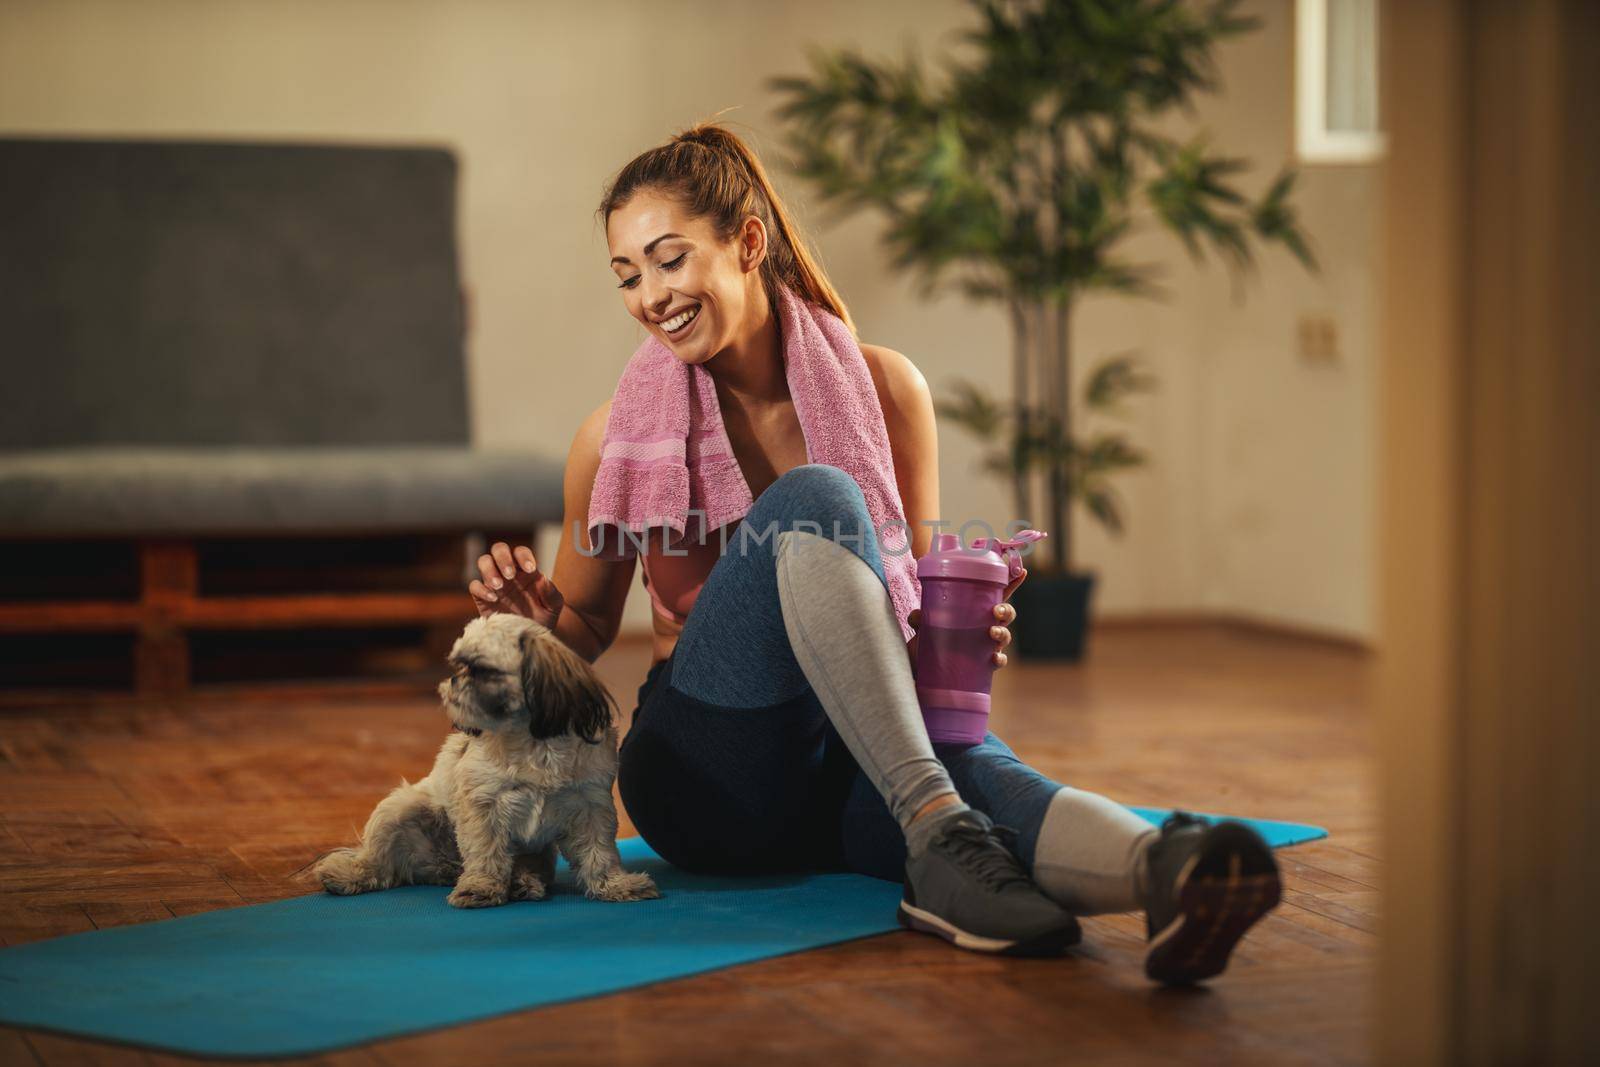 Young woman is doing stretching exercises in the living room at home supporting by her pet dog. She is resting on floor mat in morning sunshine.